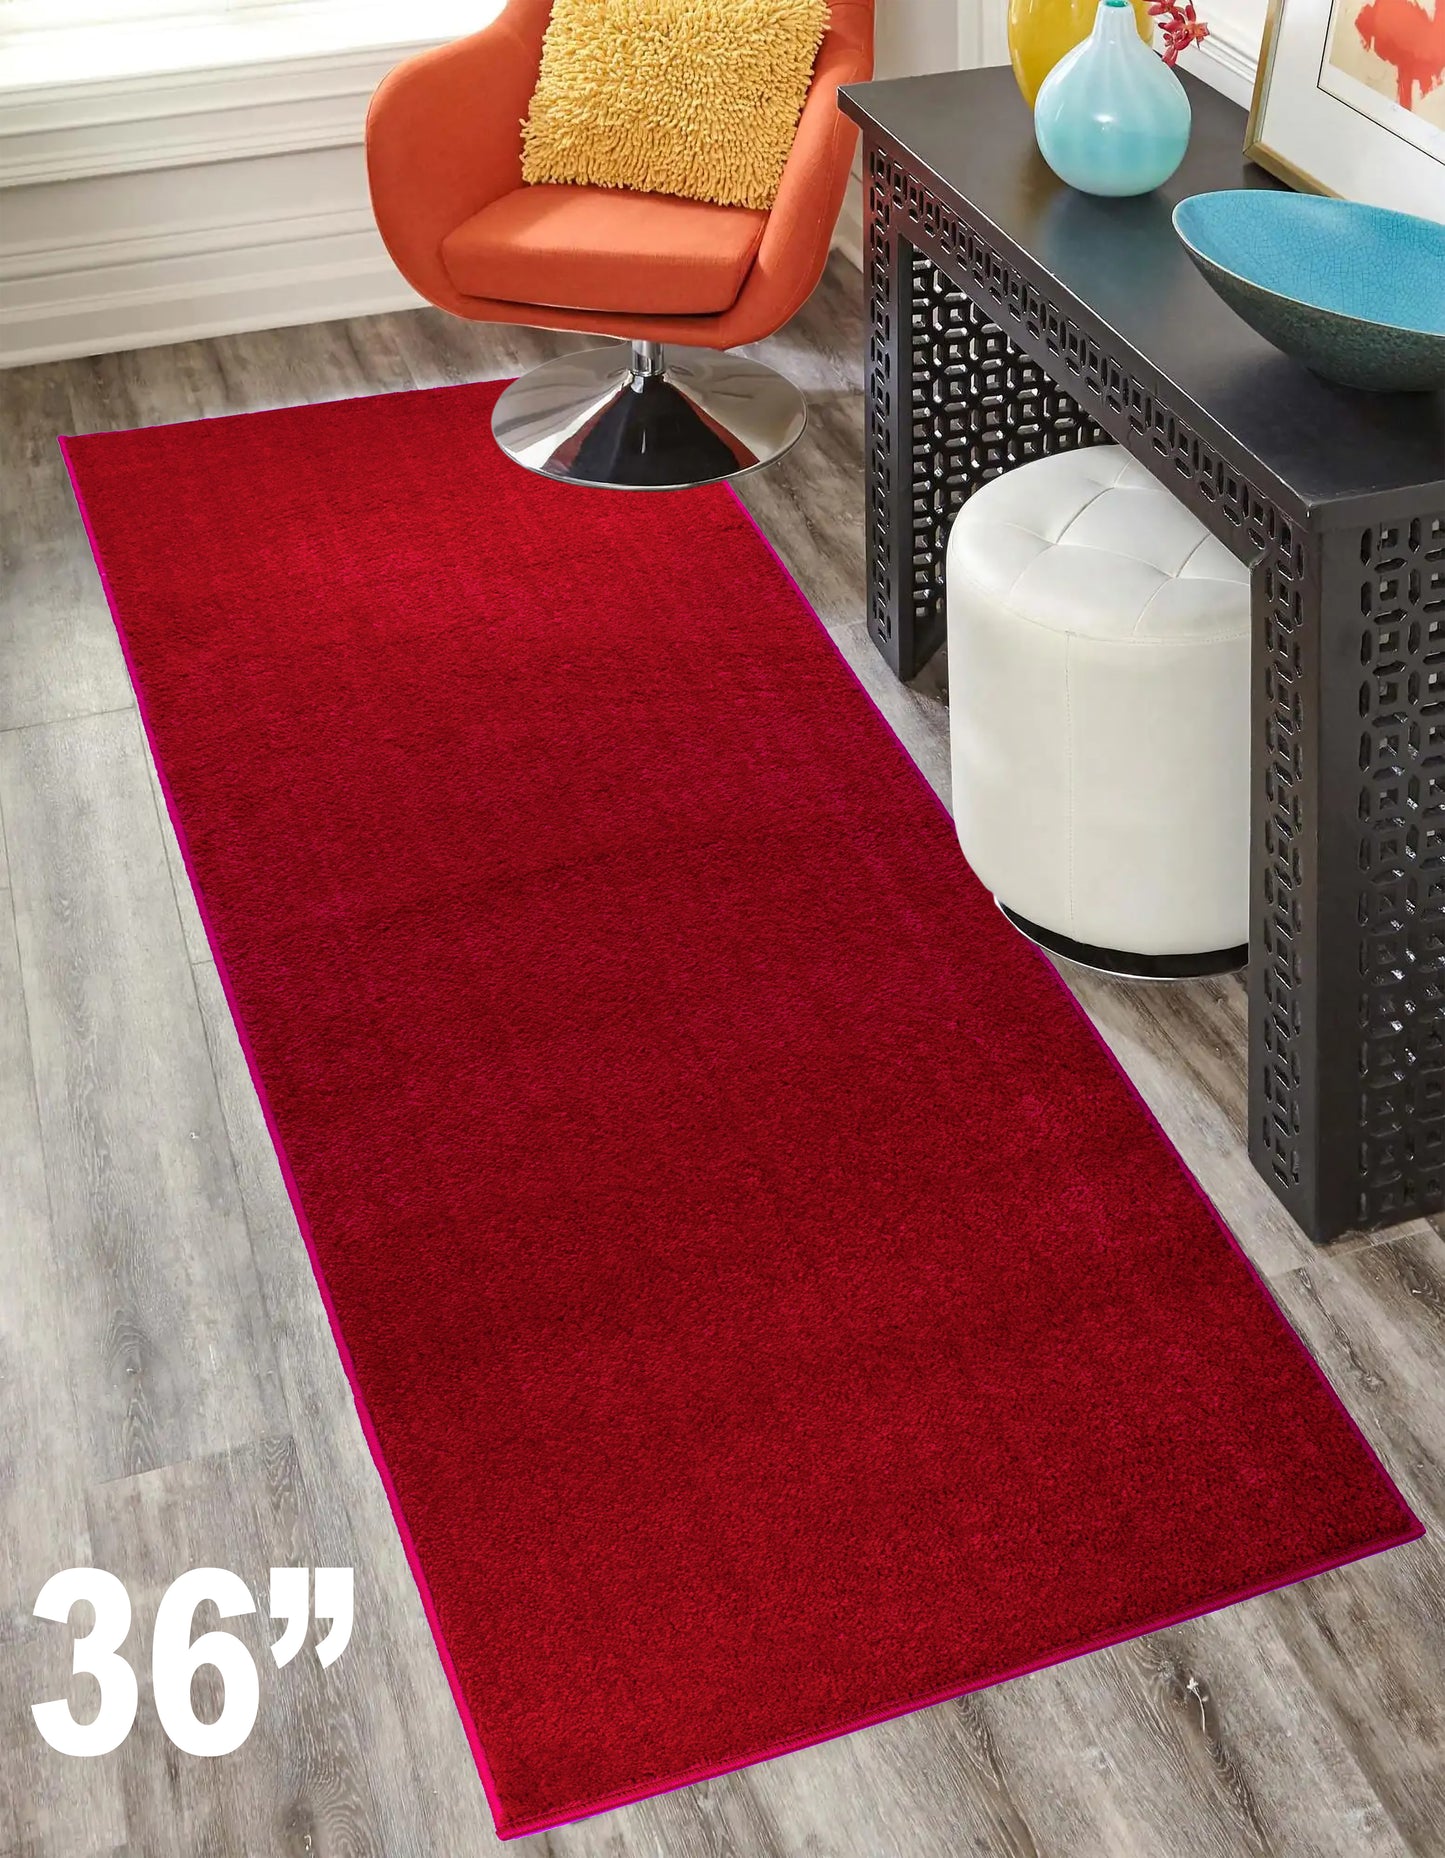 Machine Washable Custom Size Runner Rug Solid RedColor Skid Resistant Rug Runner Customize Up to 50 Feet and 36 Inch Width Runner Rug